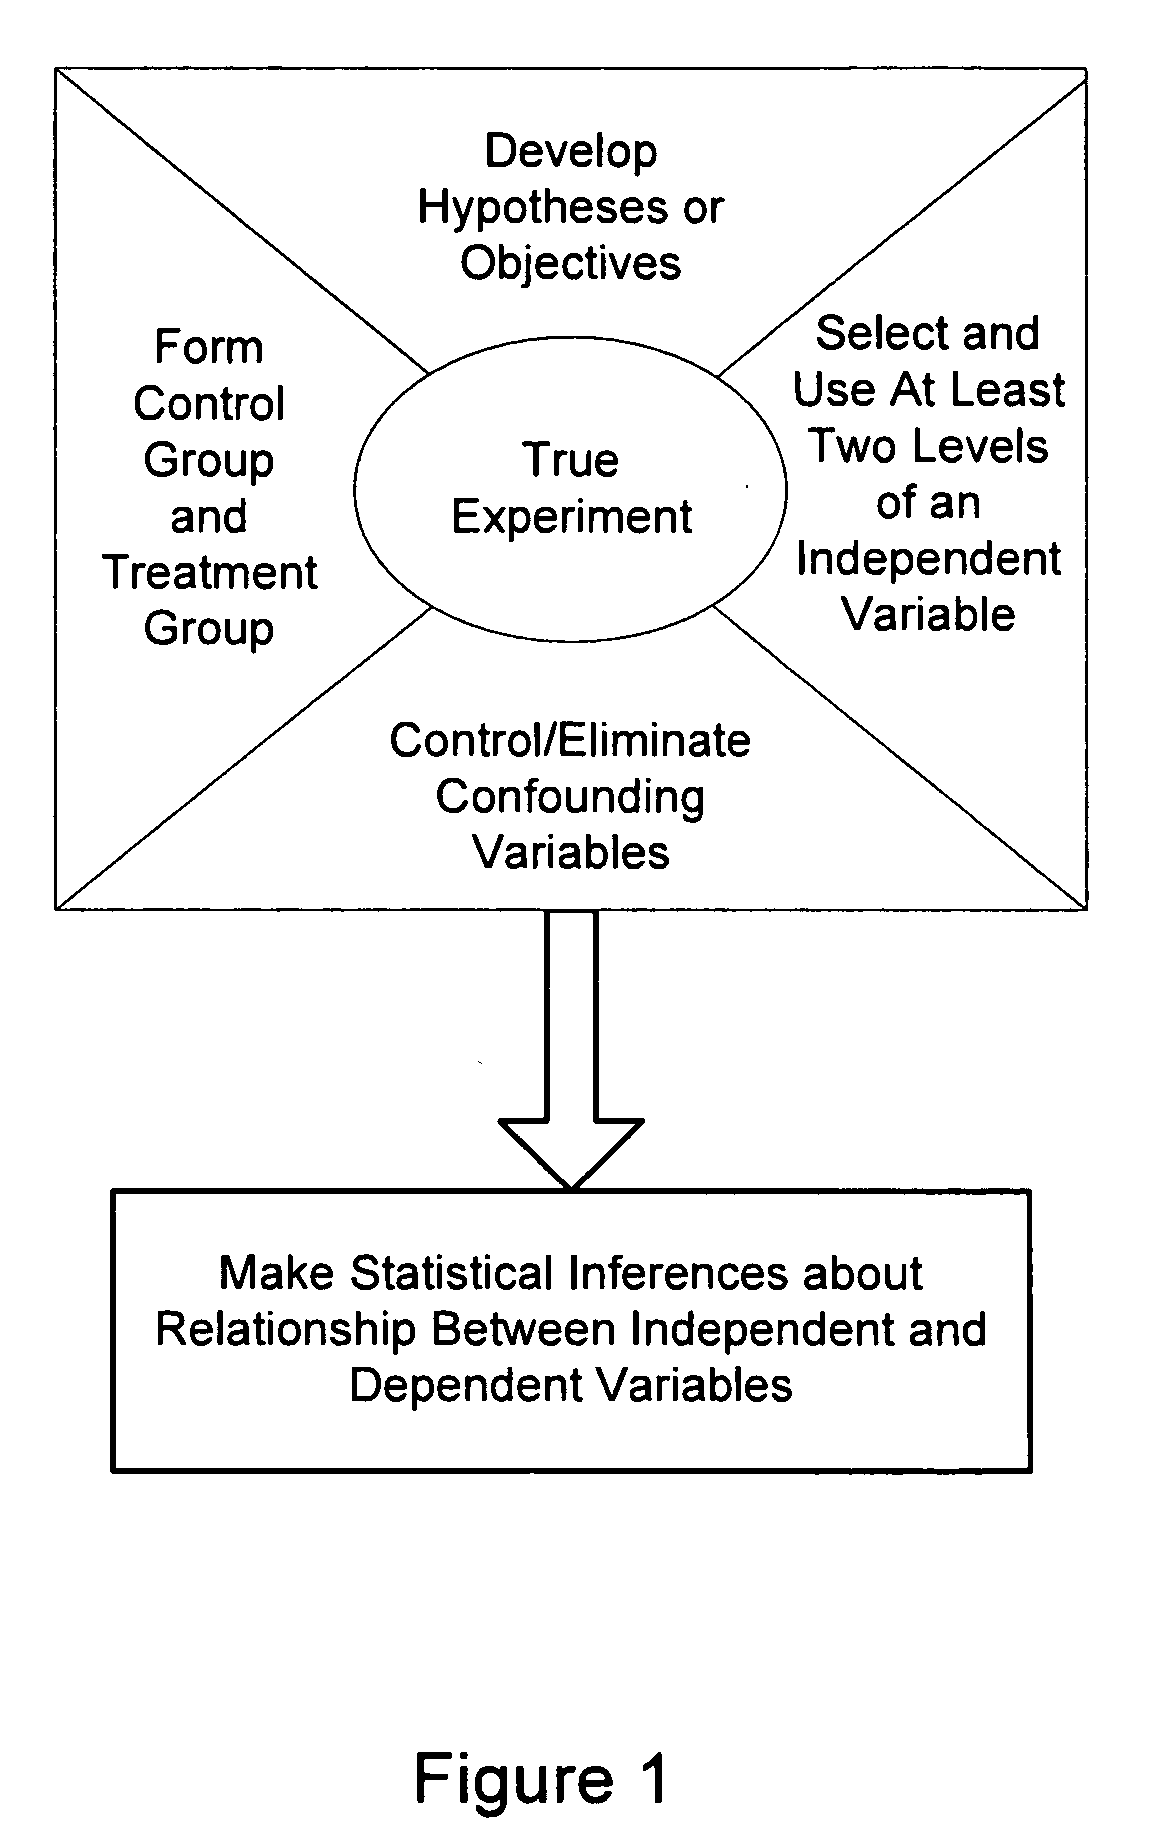 Systems and methods for designing experiments